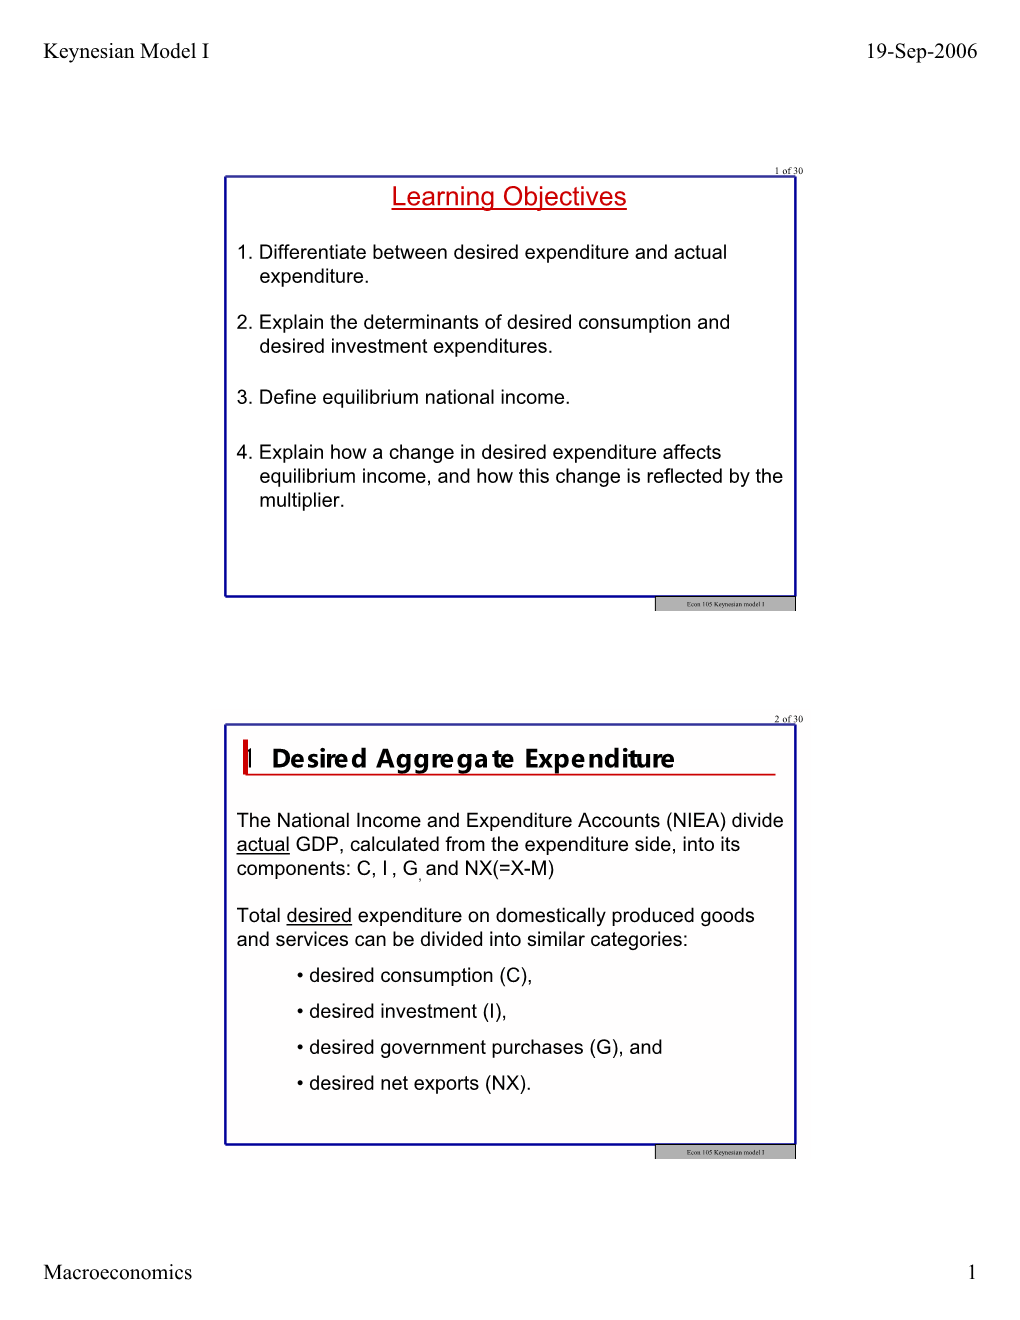 Learning Objectives 1 Desired Aggregate Expenditure